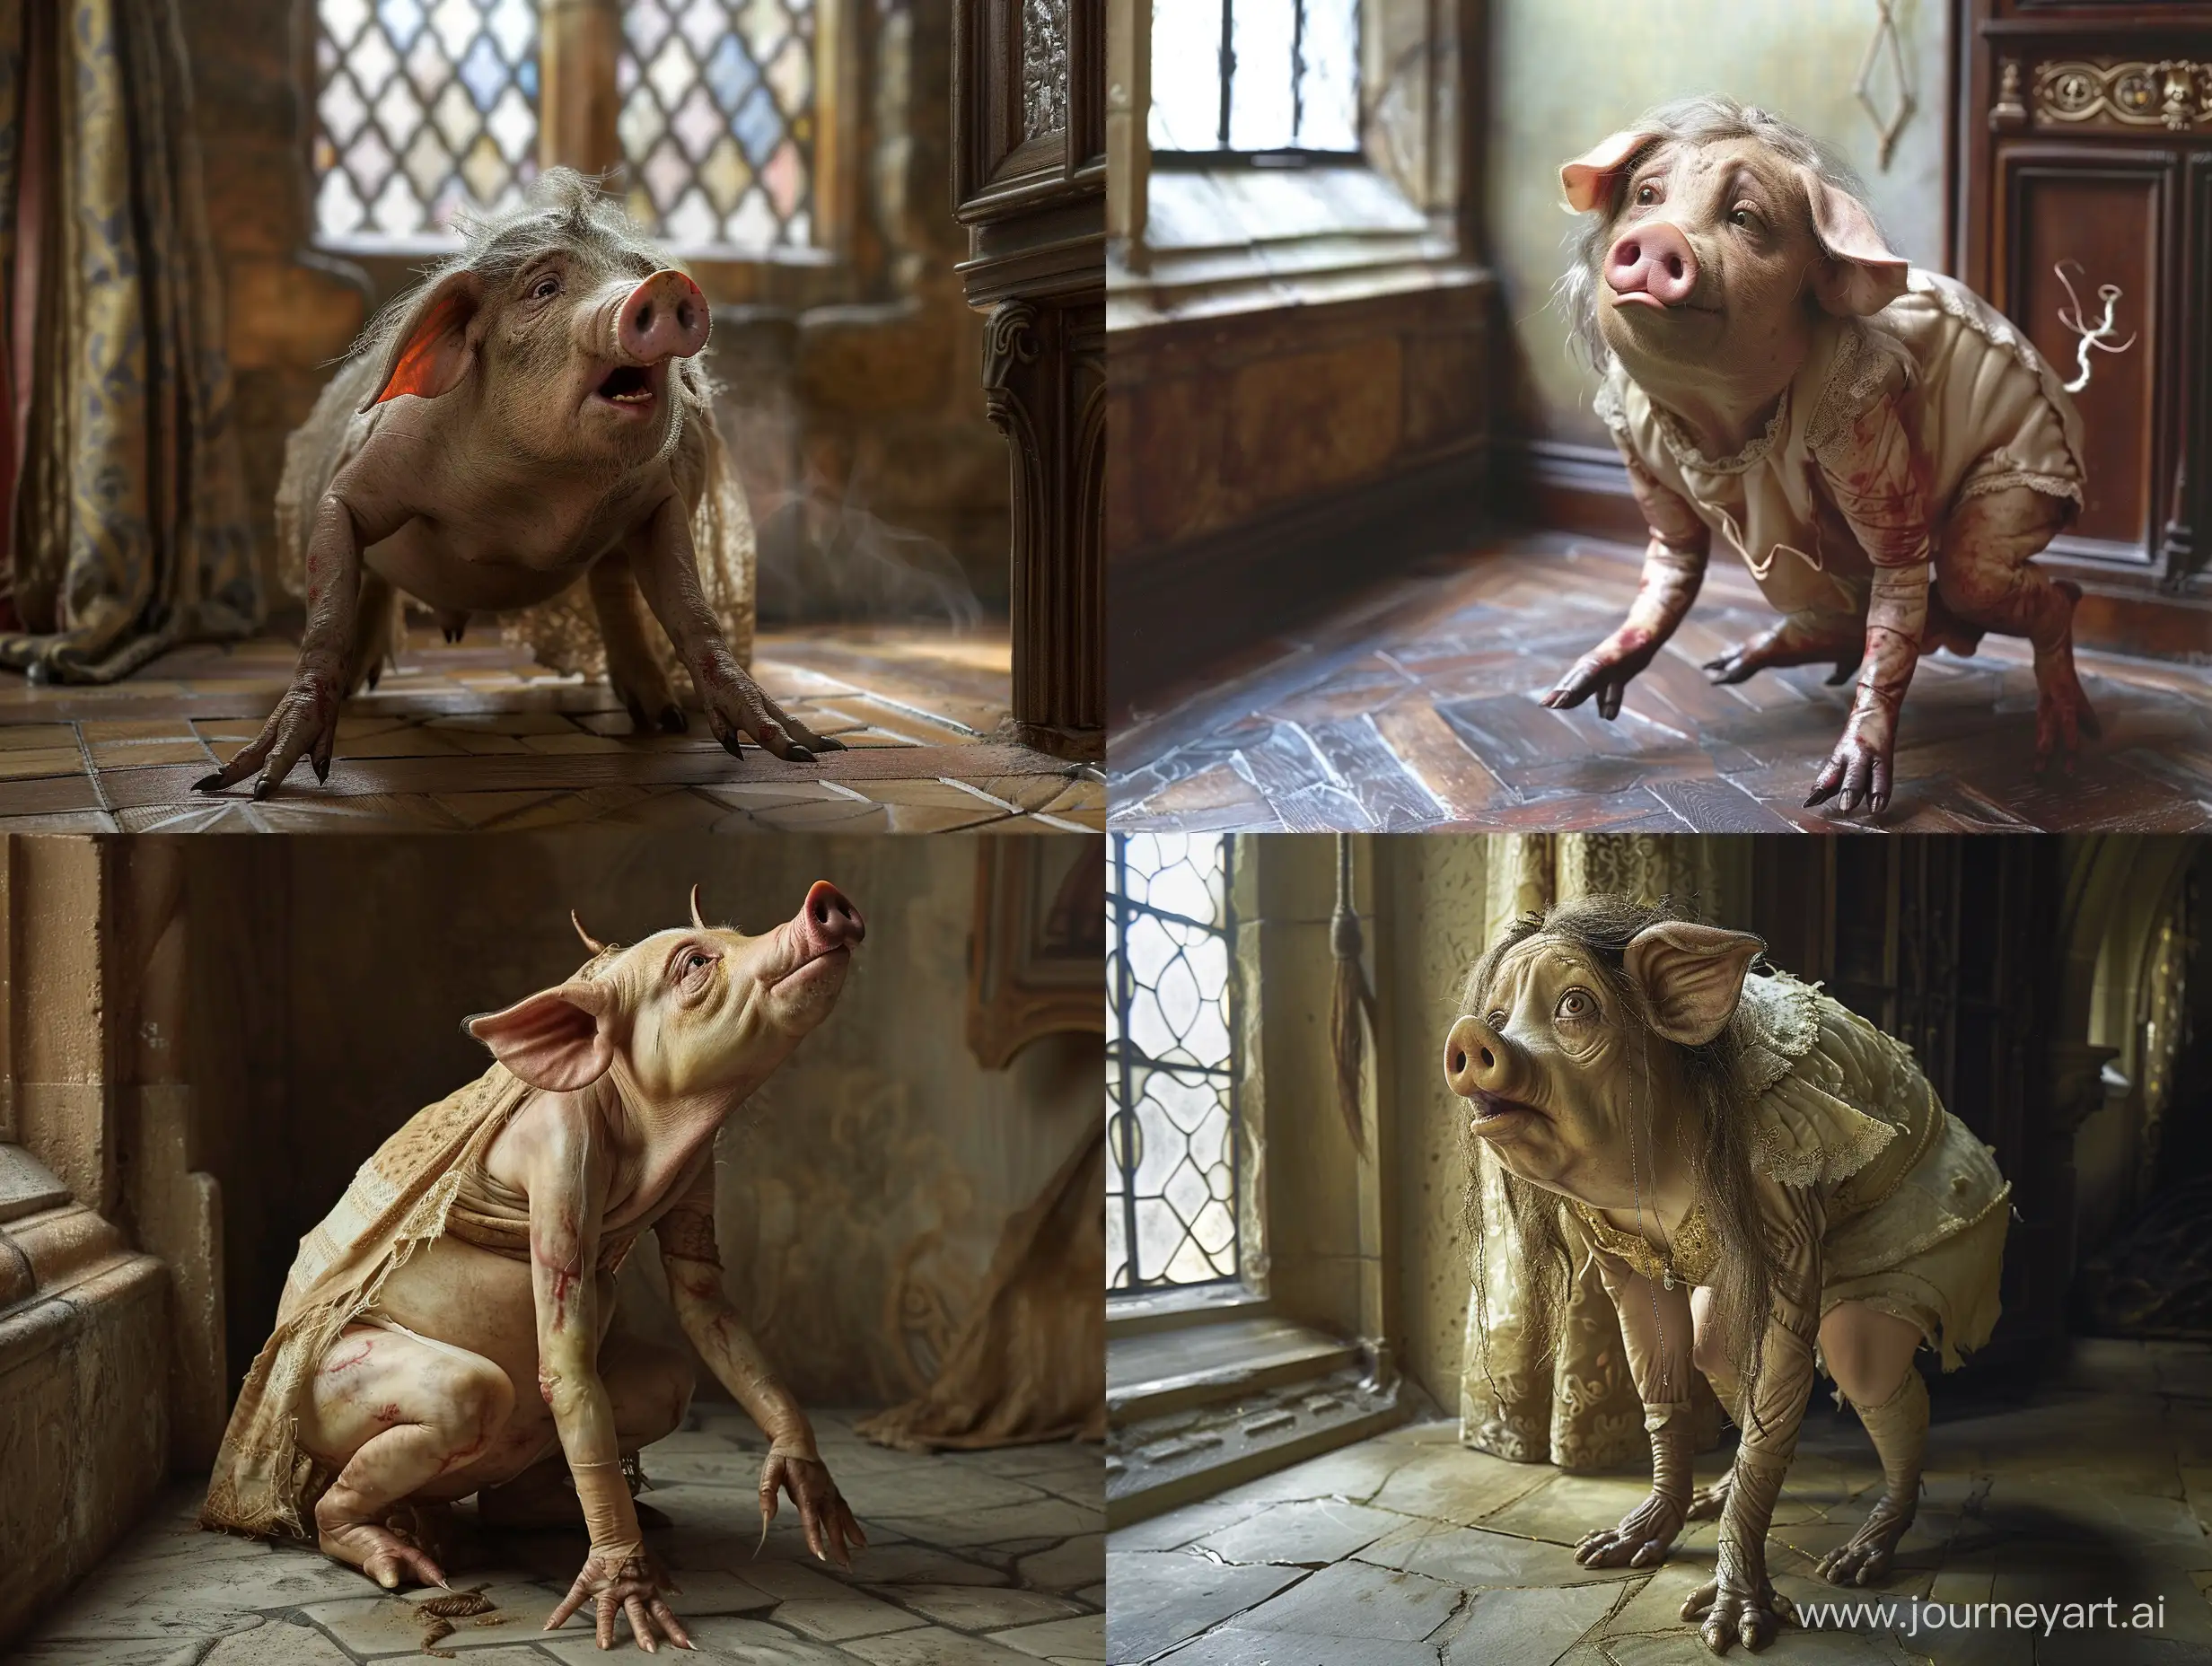 A photograph of a medieval princess who is transforming into a pig due to a magic spell. She has hooves, a snout and a tail. She has no human features left. She looks confused and scared. She is standing on all fours on the floor, looking up at her chamber's window with a sad expression.